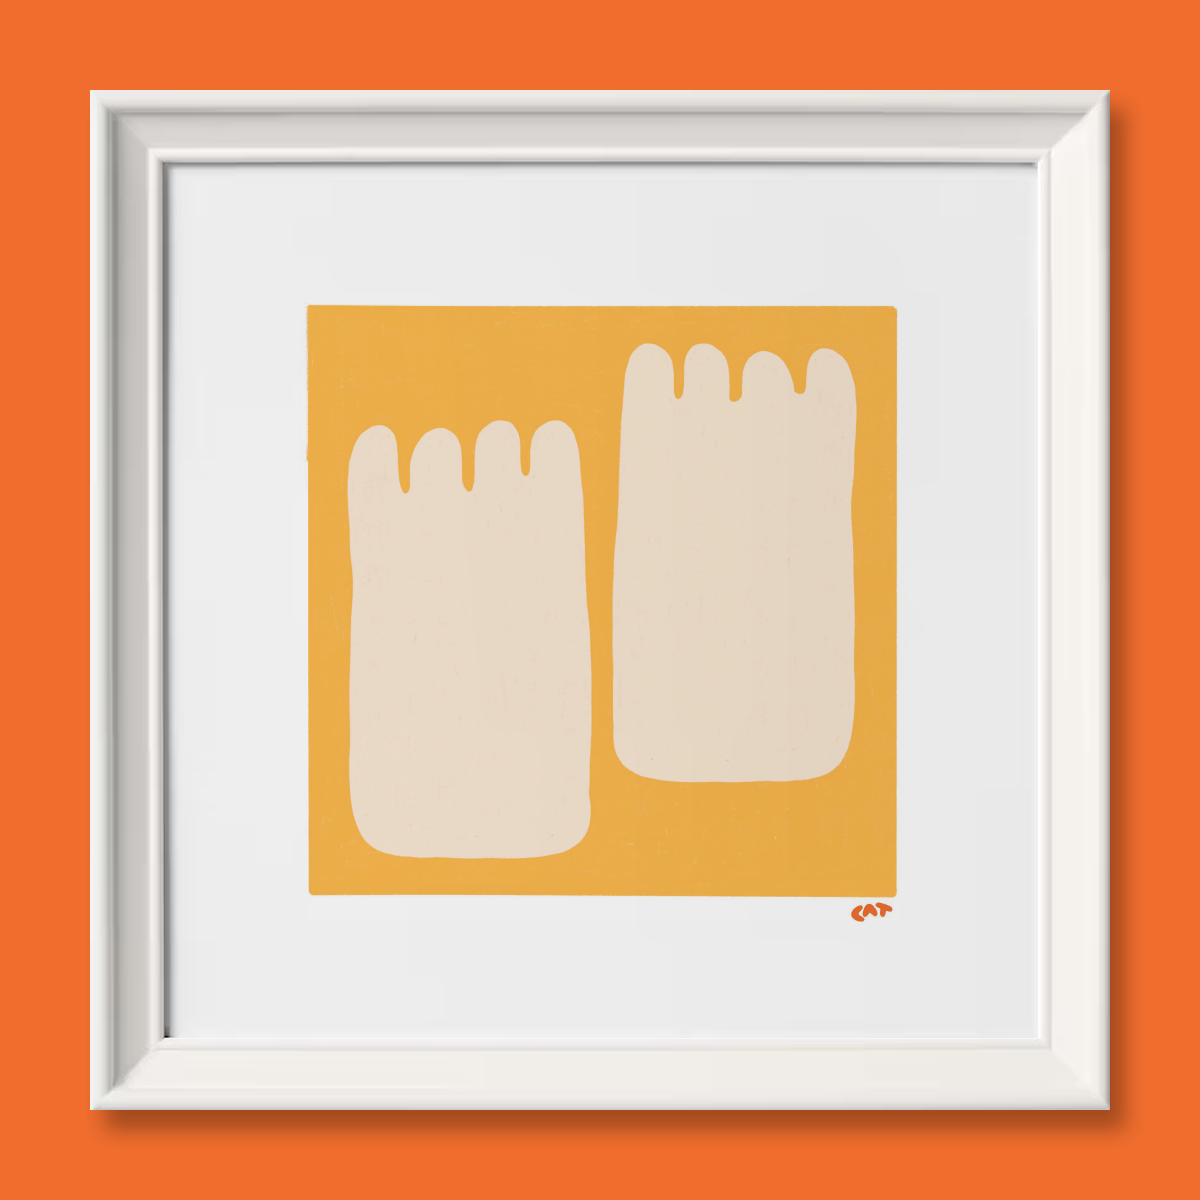 White framed print of a yellow square with two beige foot-shaped objects.